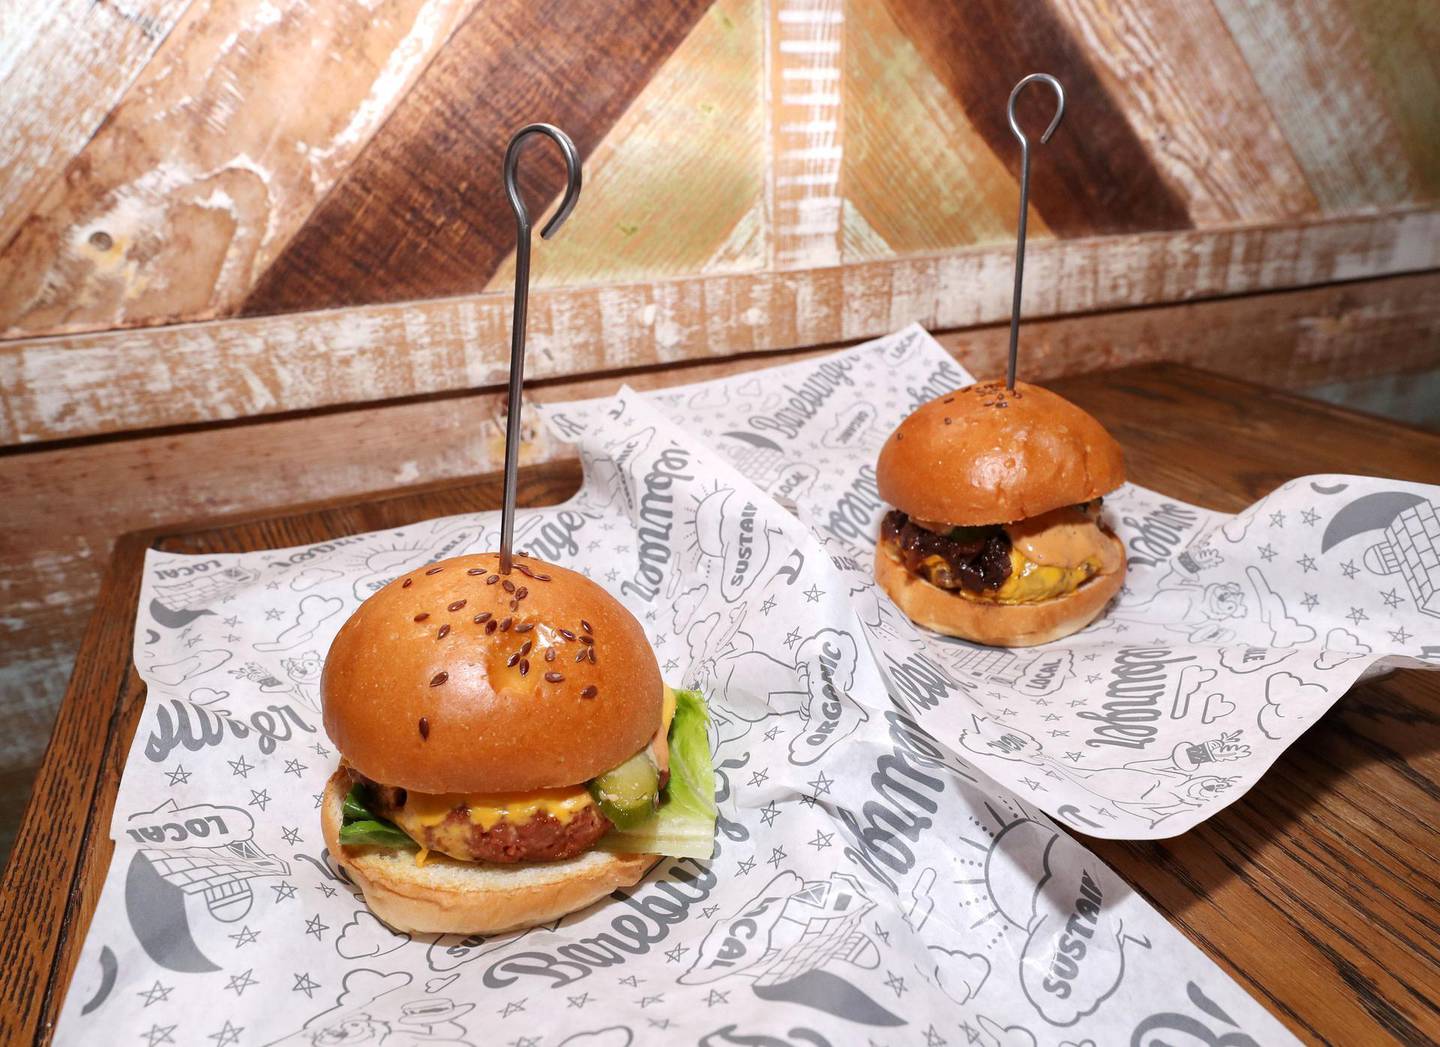 Dubai, United Arab Emirates - September 10, 2018: A comparison between the vegan burger (L) and the beef burger. Bareburger are launching a revolutionary plant-based (vegan) burger that looks, cooks and satisfies like beef. Monday, September 10th, 2018 at La Mer, Dubai. Chris Whiteoak / The National